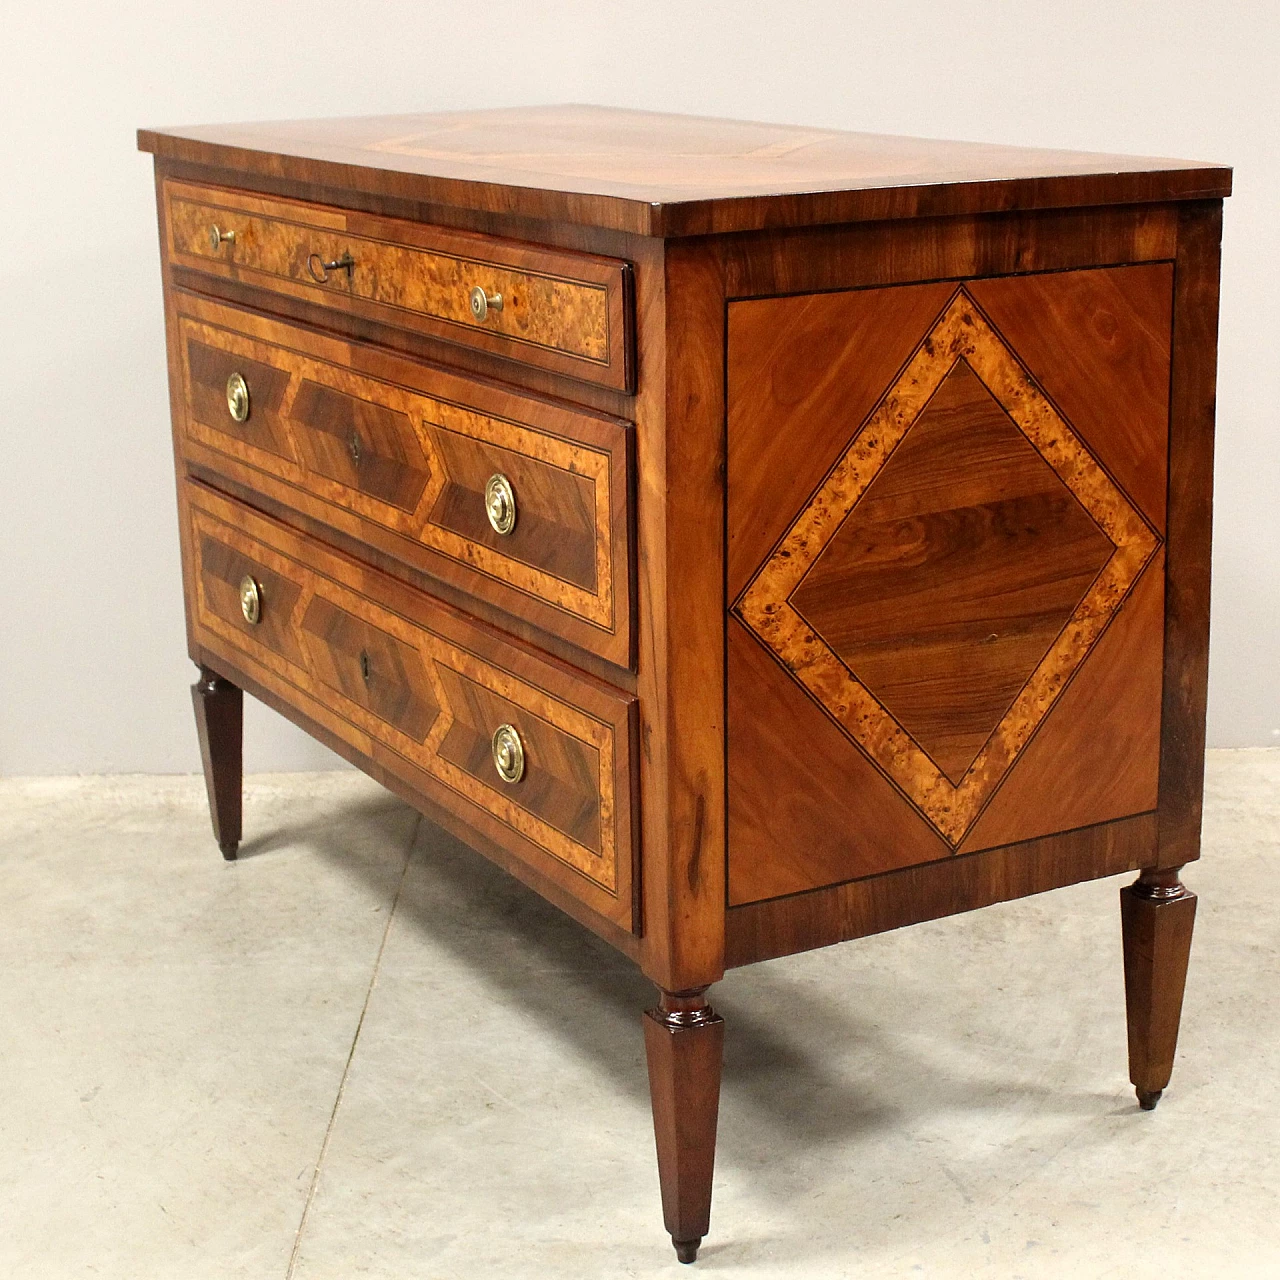 Emilian Louis XVI walnut and cherry commode with inlays, 18th century 5